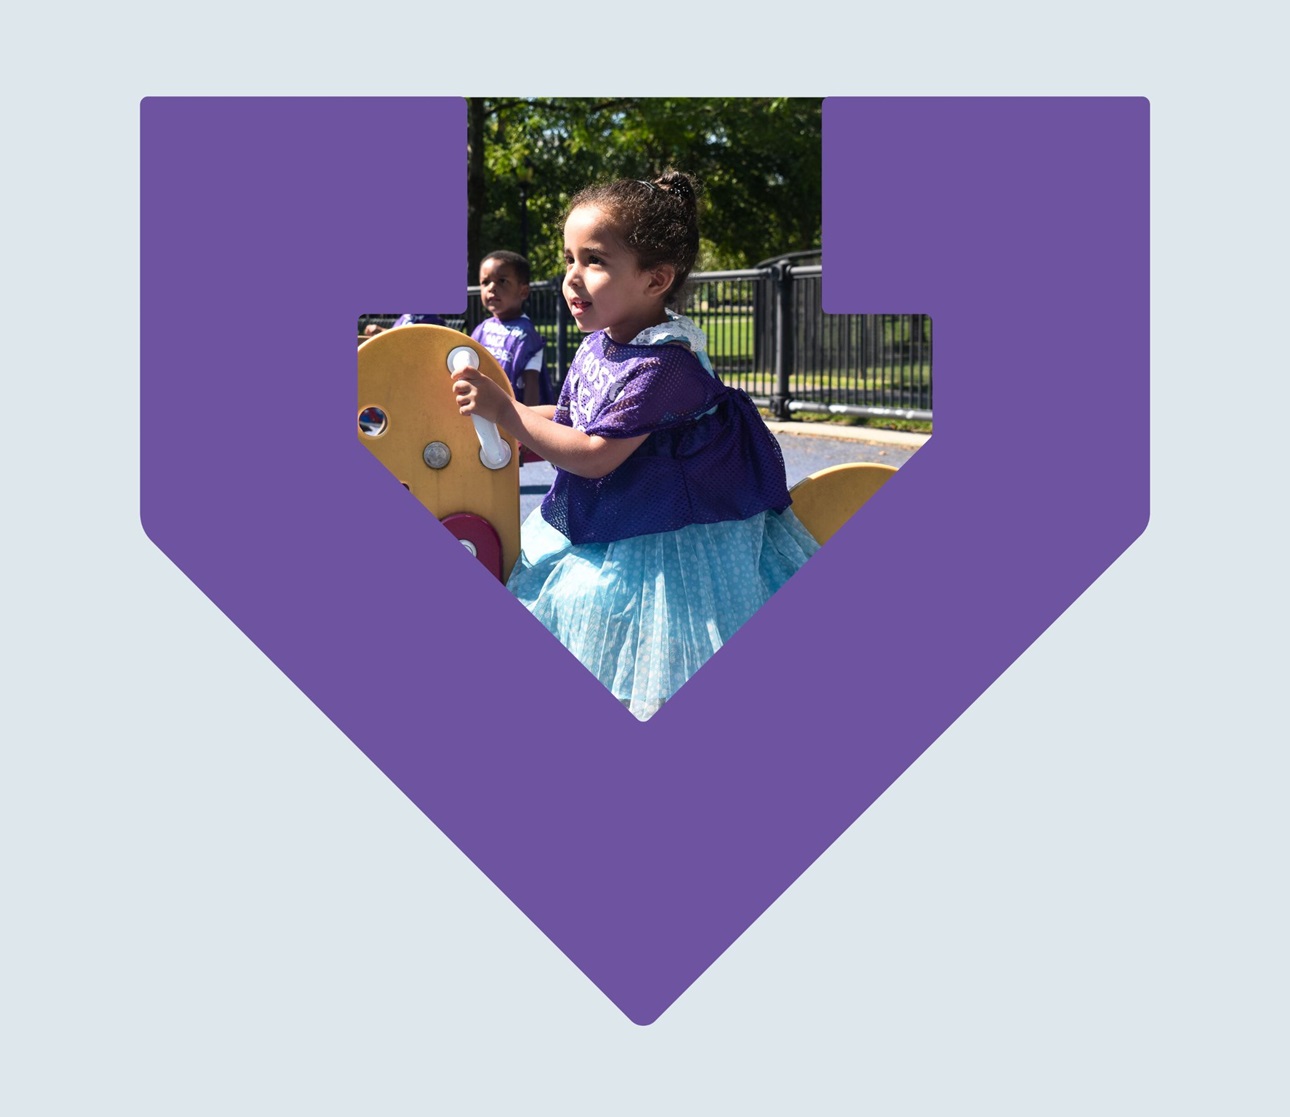 A young girl sits on a rocking horse outside on a playground framed by the purple TBF arrow